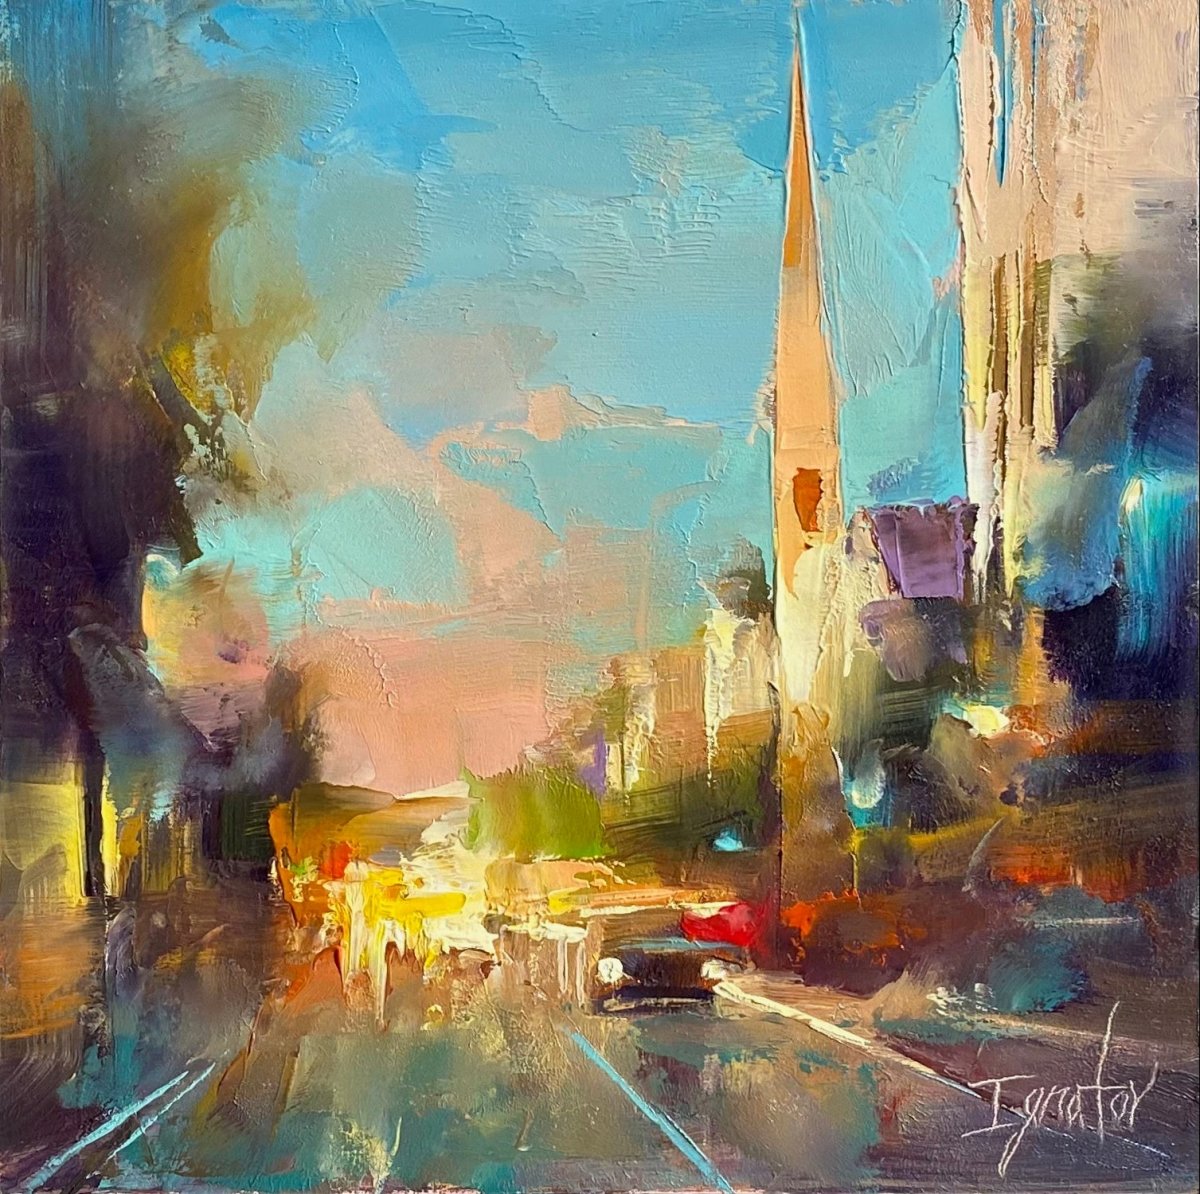 Downtown Lights, Study by Ignat Ignatov at LePrince Galleries